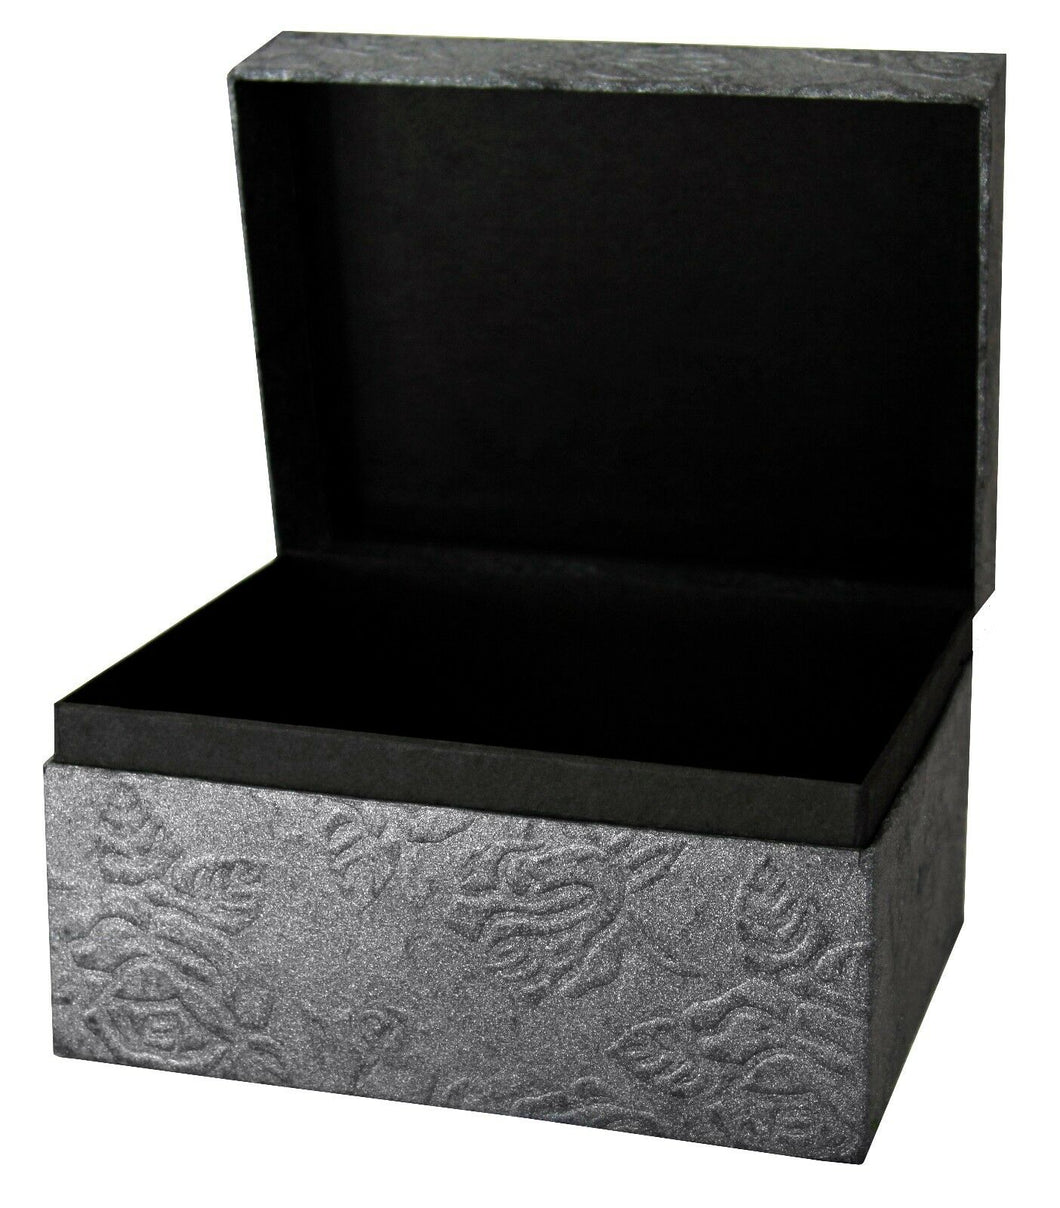 Small/Keepsake 90 Cubic Inch Metallic Black Chest Earthurn Cremation Urn Ashes